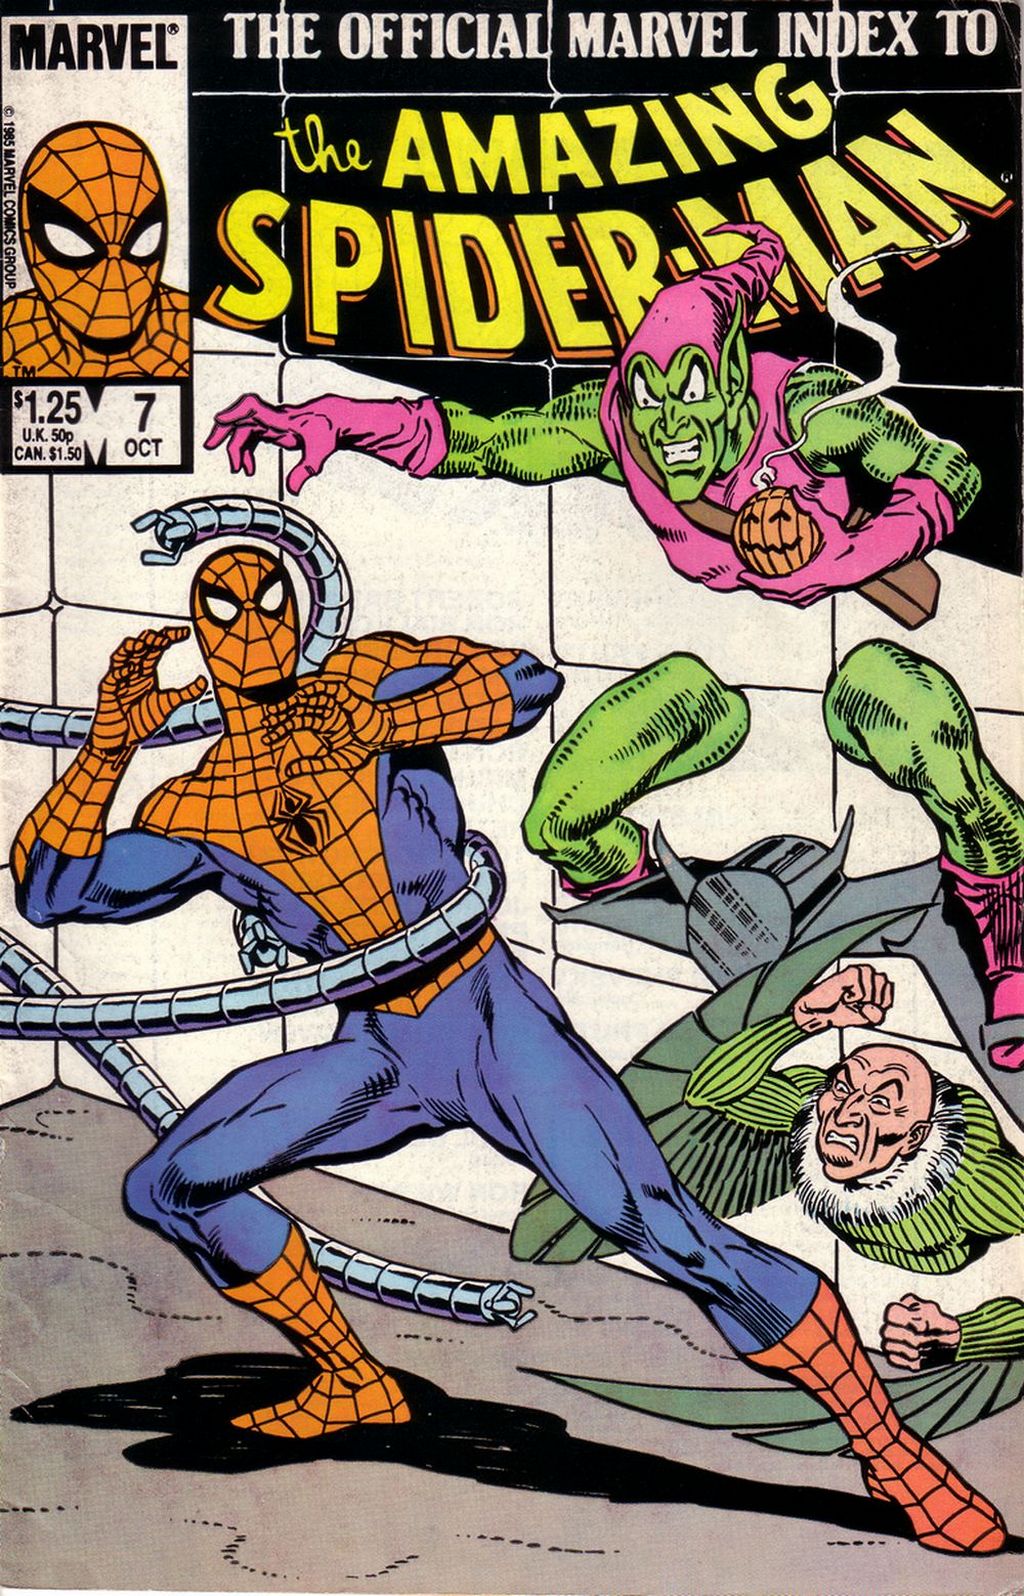 Read online The Official Marvel Index to The Amazing Spider-Man comic -  Issue #7 - 1